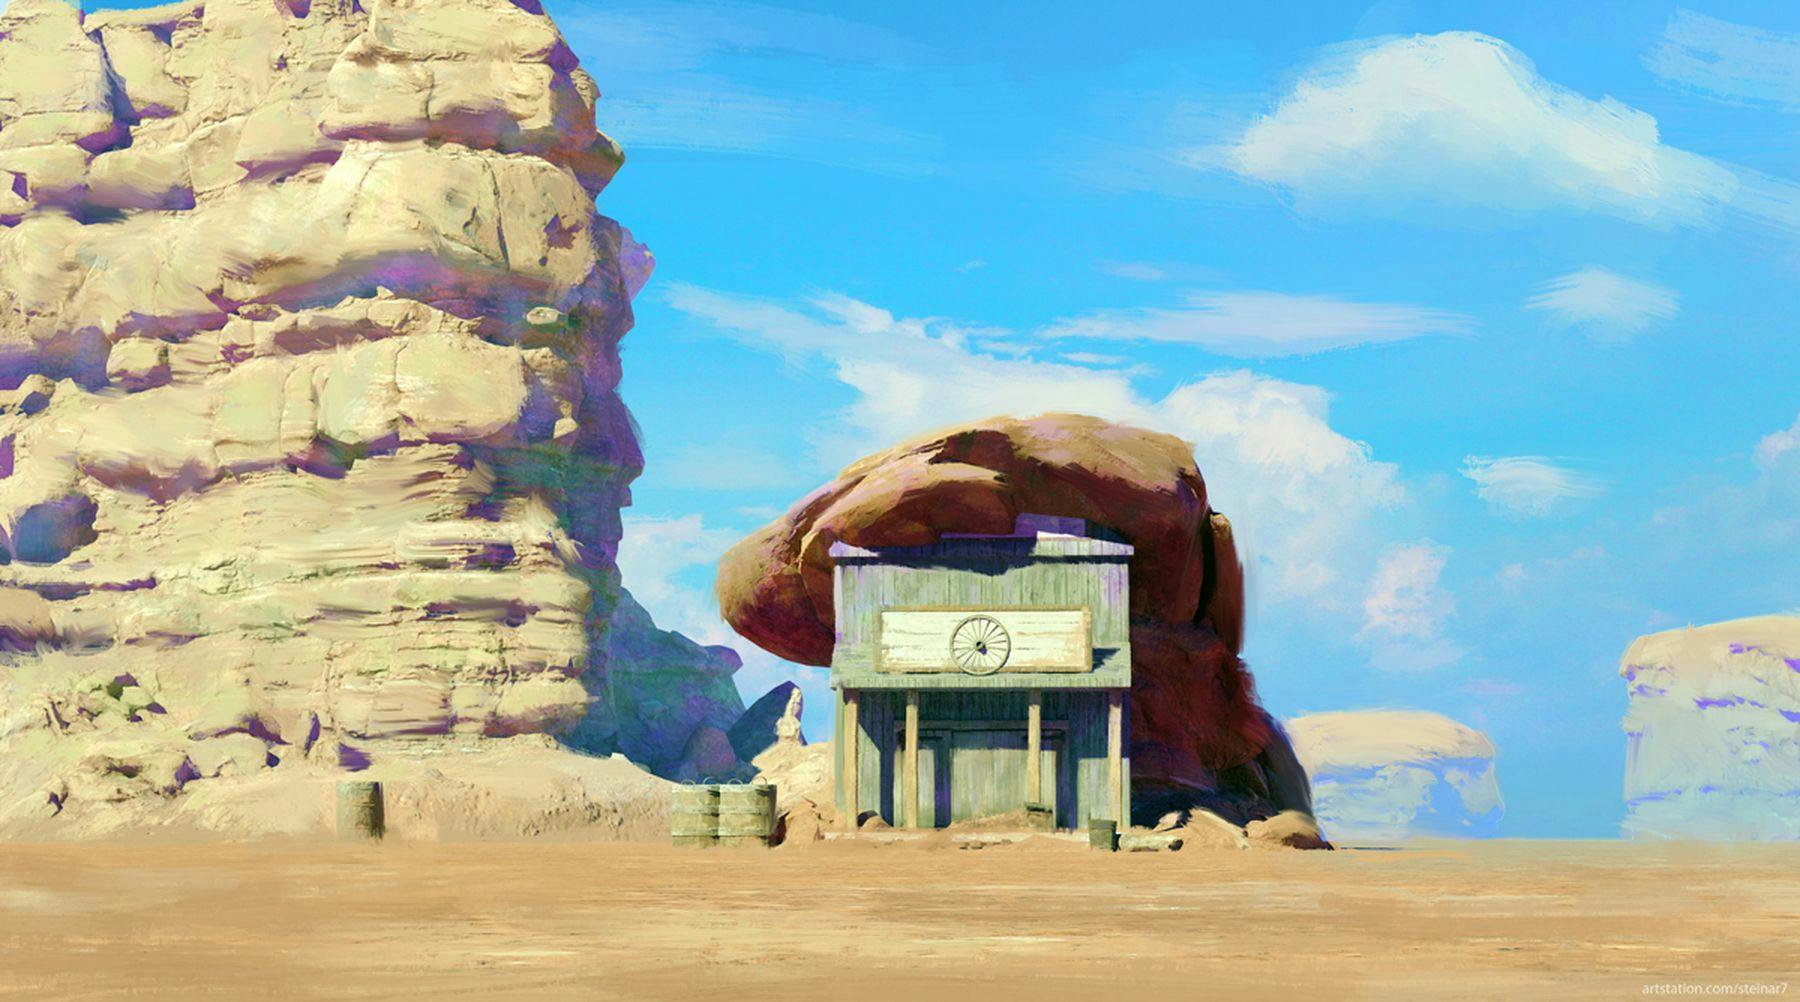 Digital artwork of a wooden hut in a desert. The hut has four pillars and a wheel above the door. The hut is in front of a large boulder and next to an even larger rock formation. The sky is a bright turquoise blue.